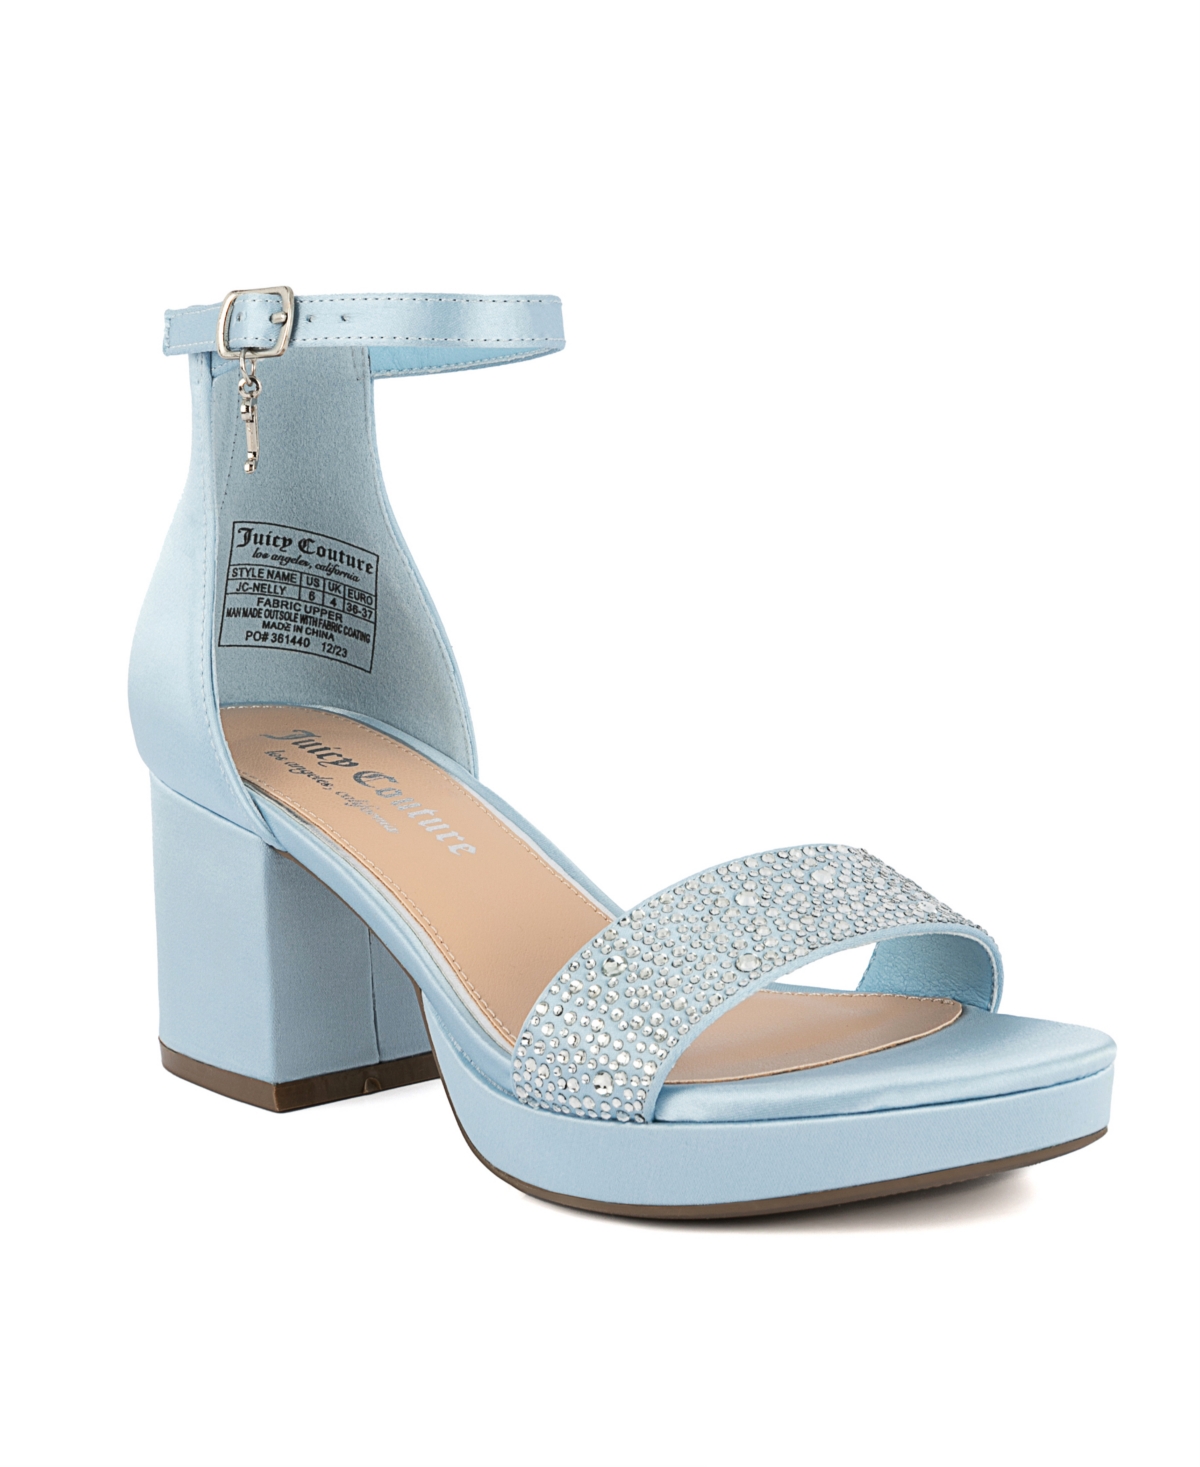 Shop Juicy Couture Women's Nelly Rhinestone Two-piece Platform Dress Sandals In Light Blue